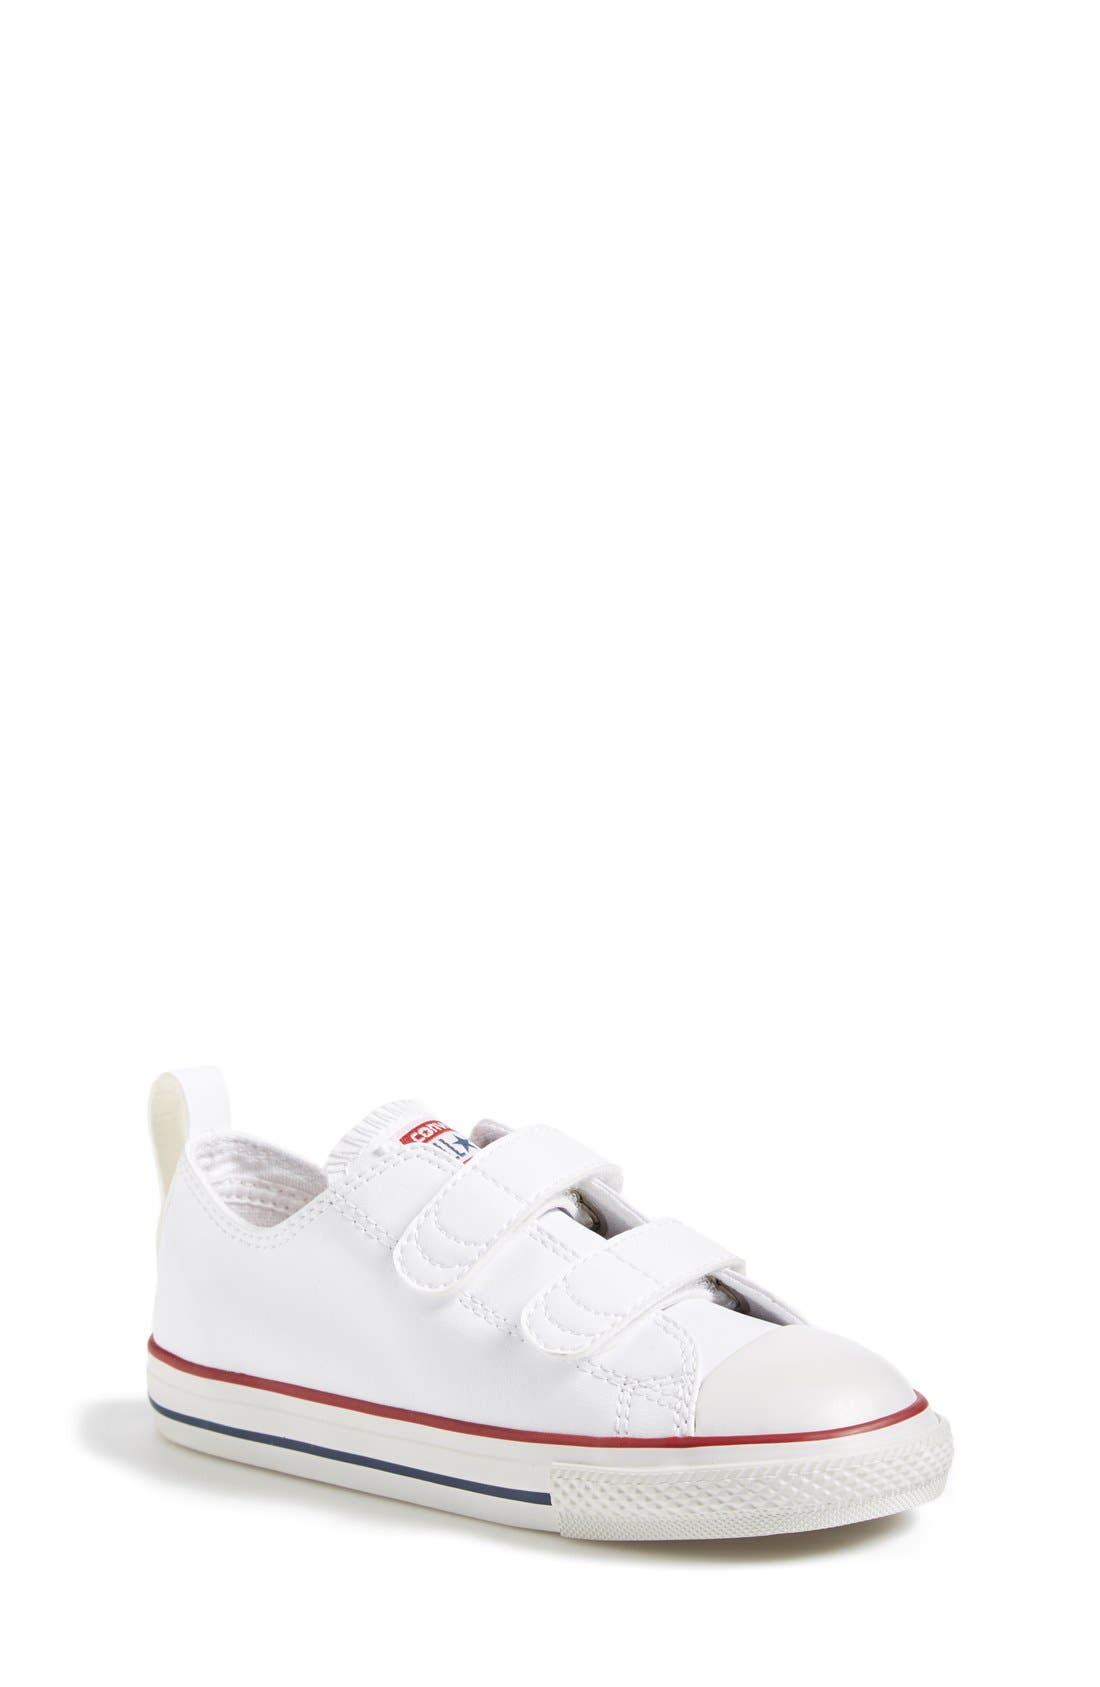 white chucks for toddlers